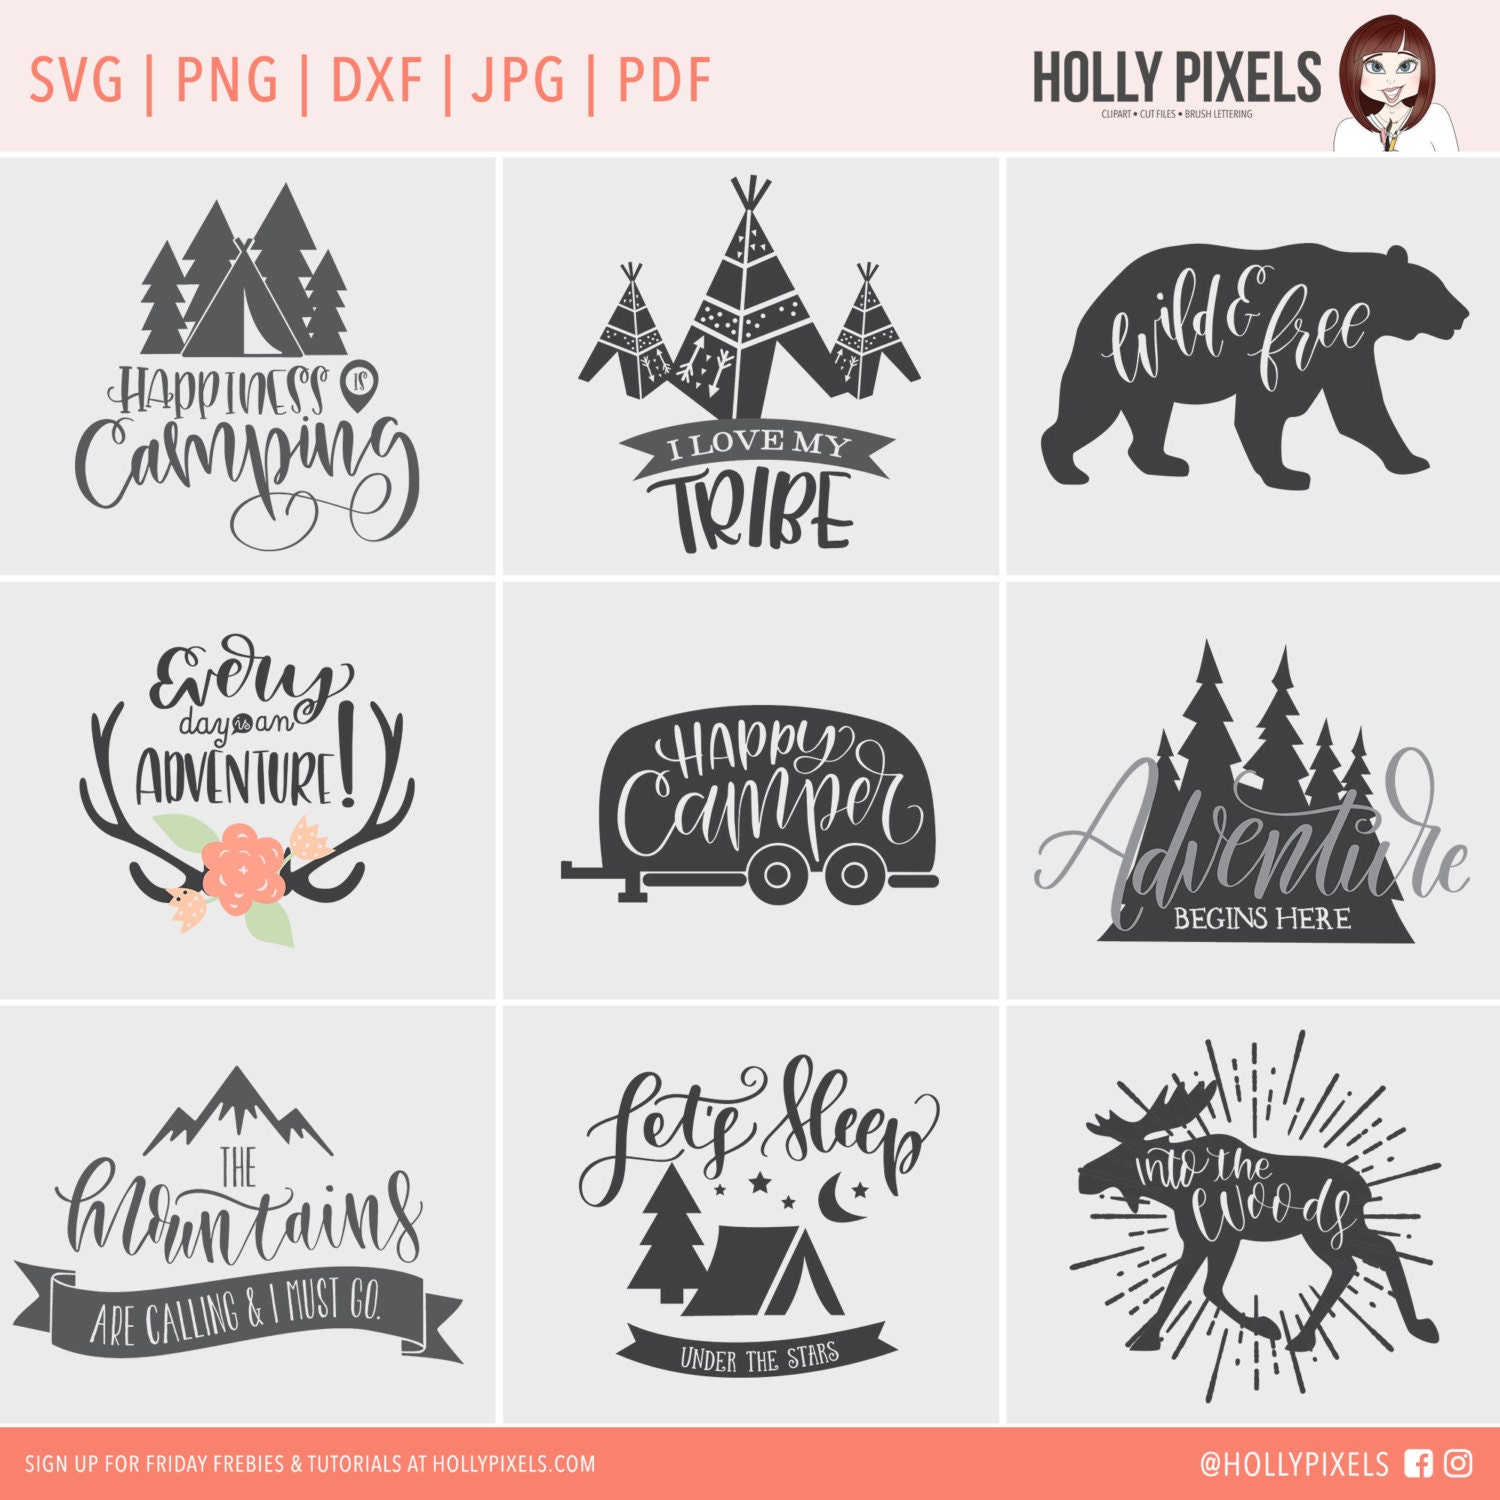 17+ Cricut Camping Svg Free most complete - Camp